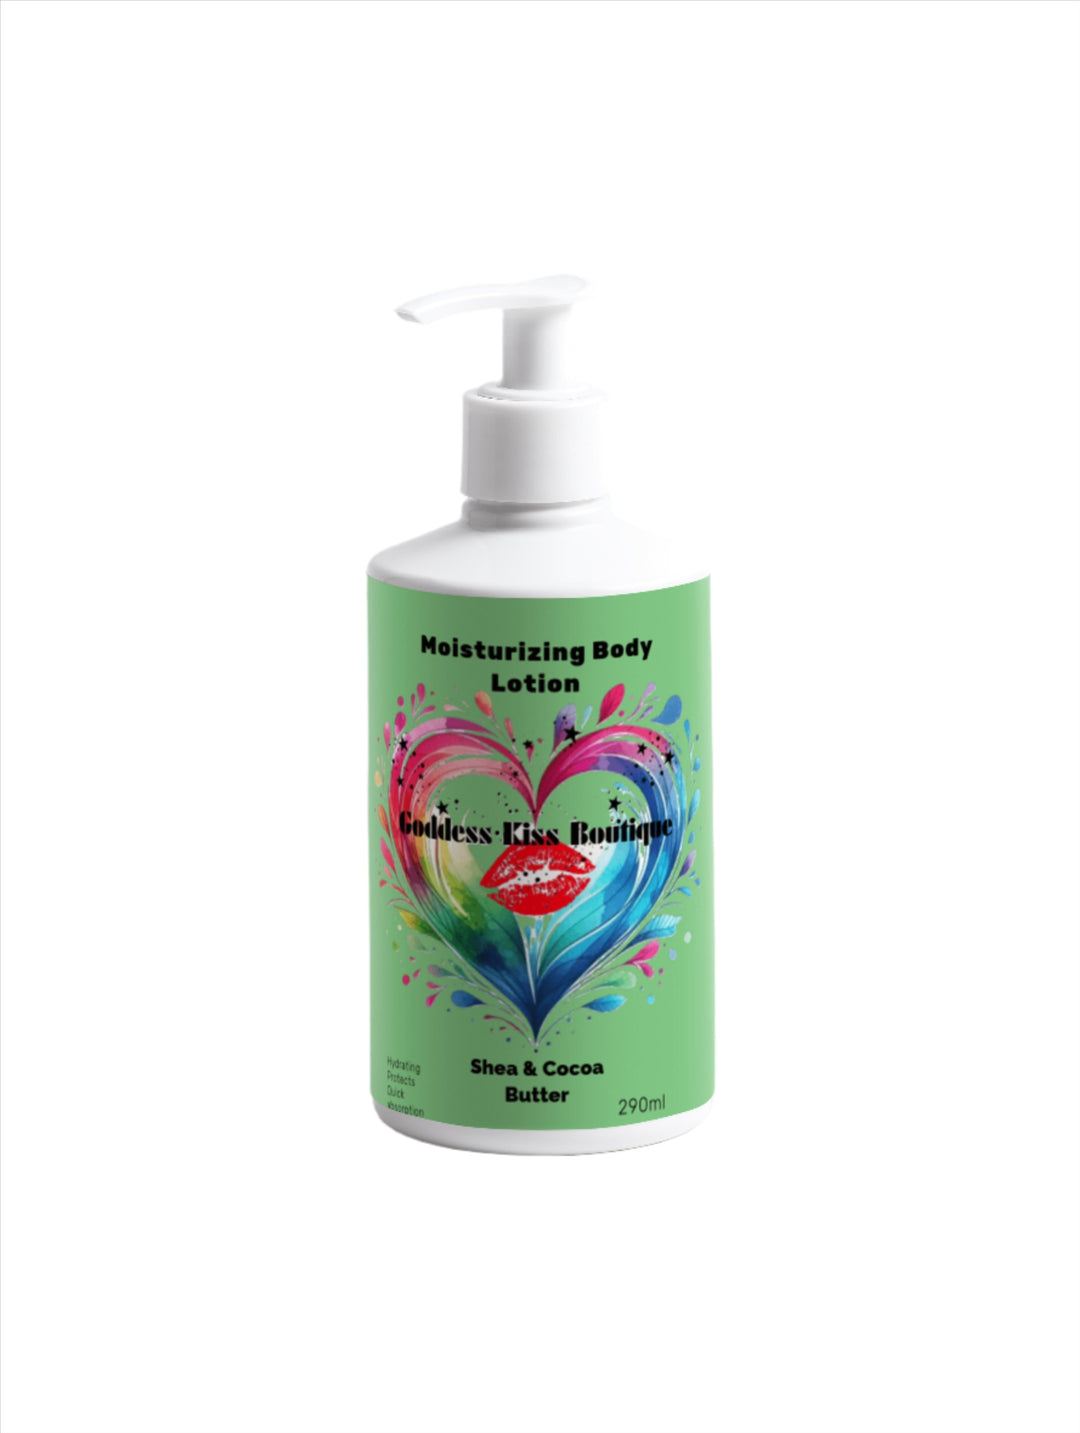 Moisturising Body Lotion with Shea and Cocoa Butter - Berry Infused Formula for Hydration and Protection - Natural & Organic - 98% Natural Ingredients